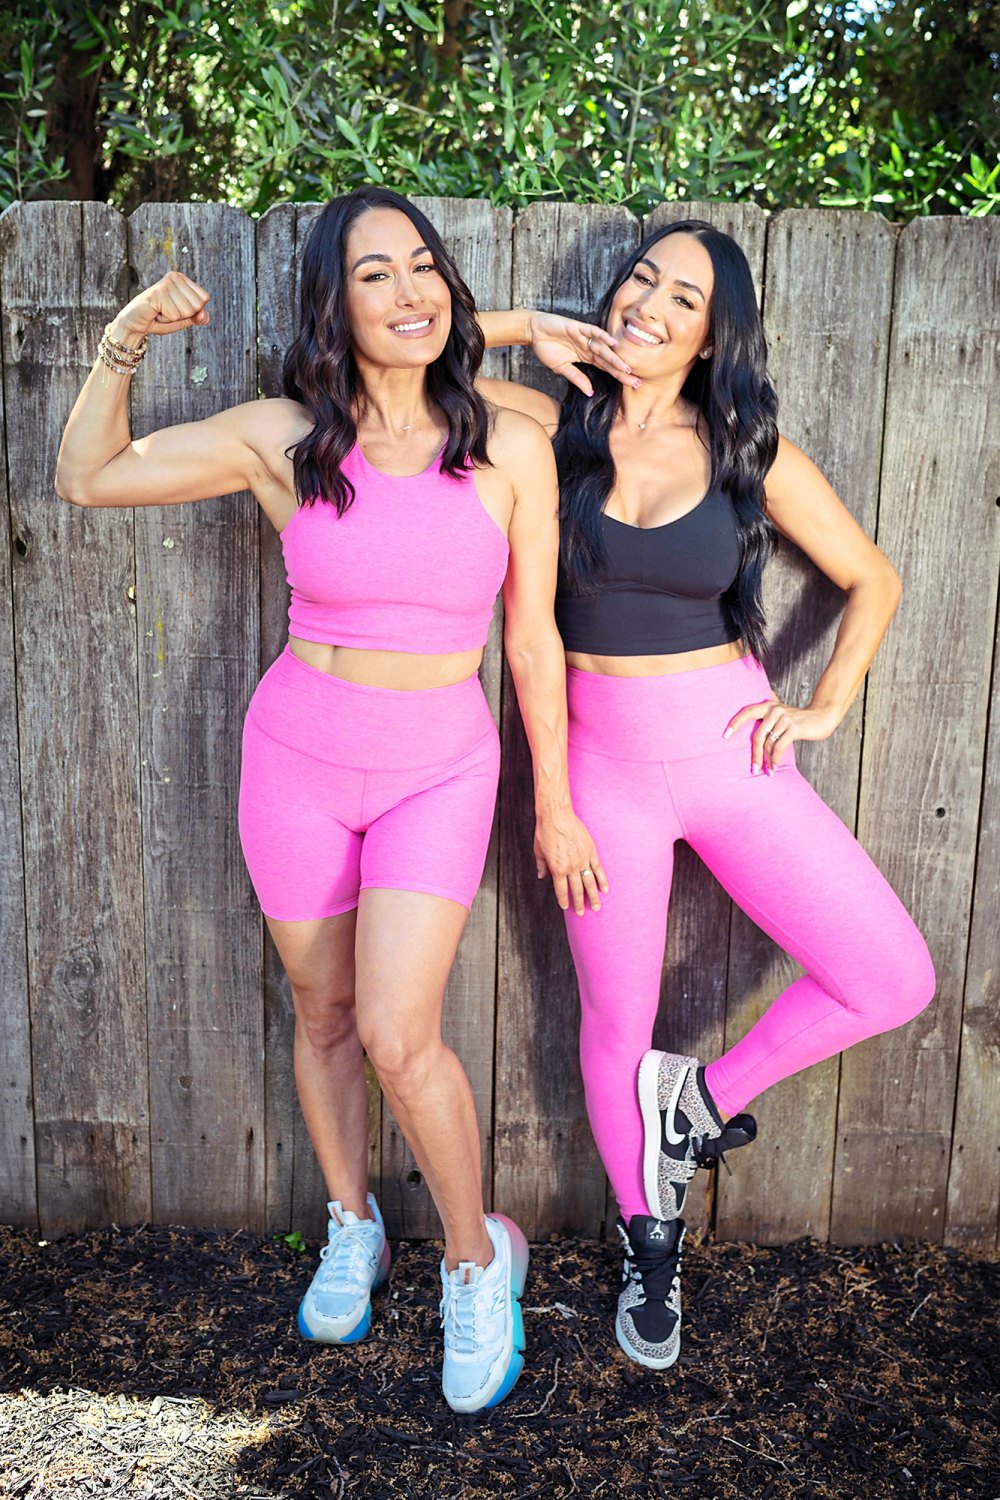 Share Diet Weekly Us Nikki, Favorite Fitness Their Secrets Garcia and Brie |